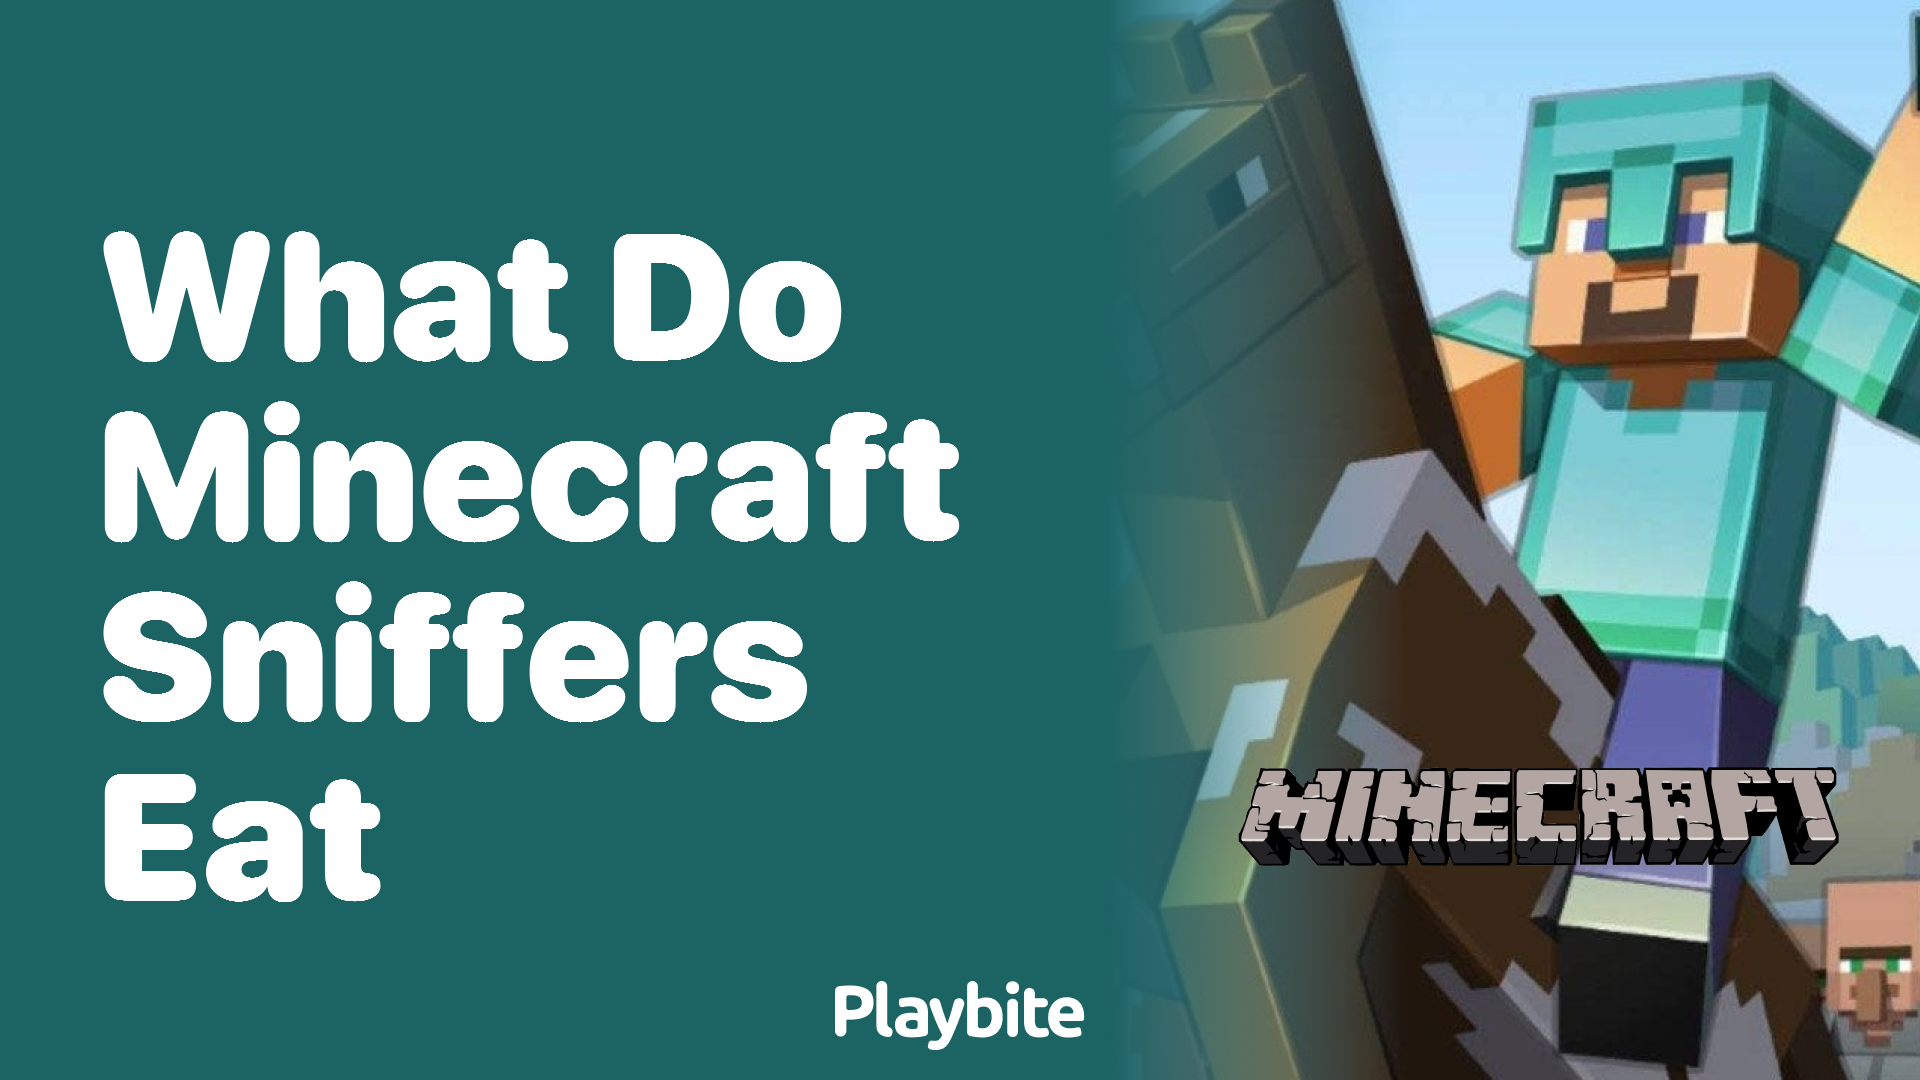 What Do Minecraft Sniffers Eat?